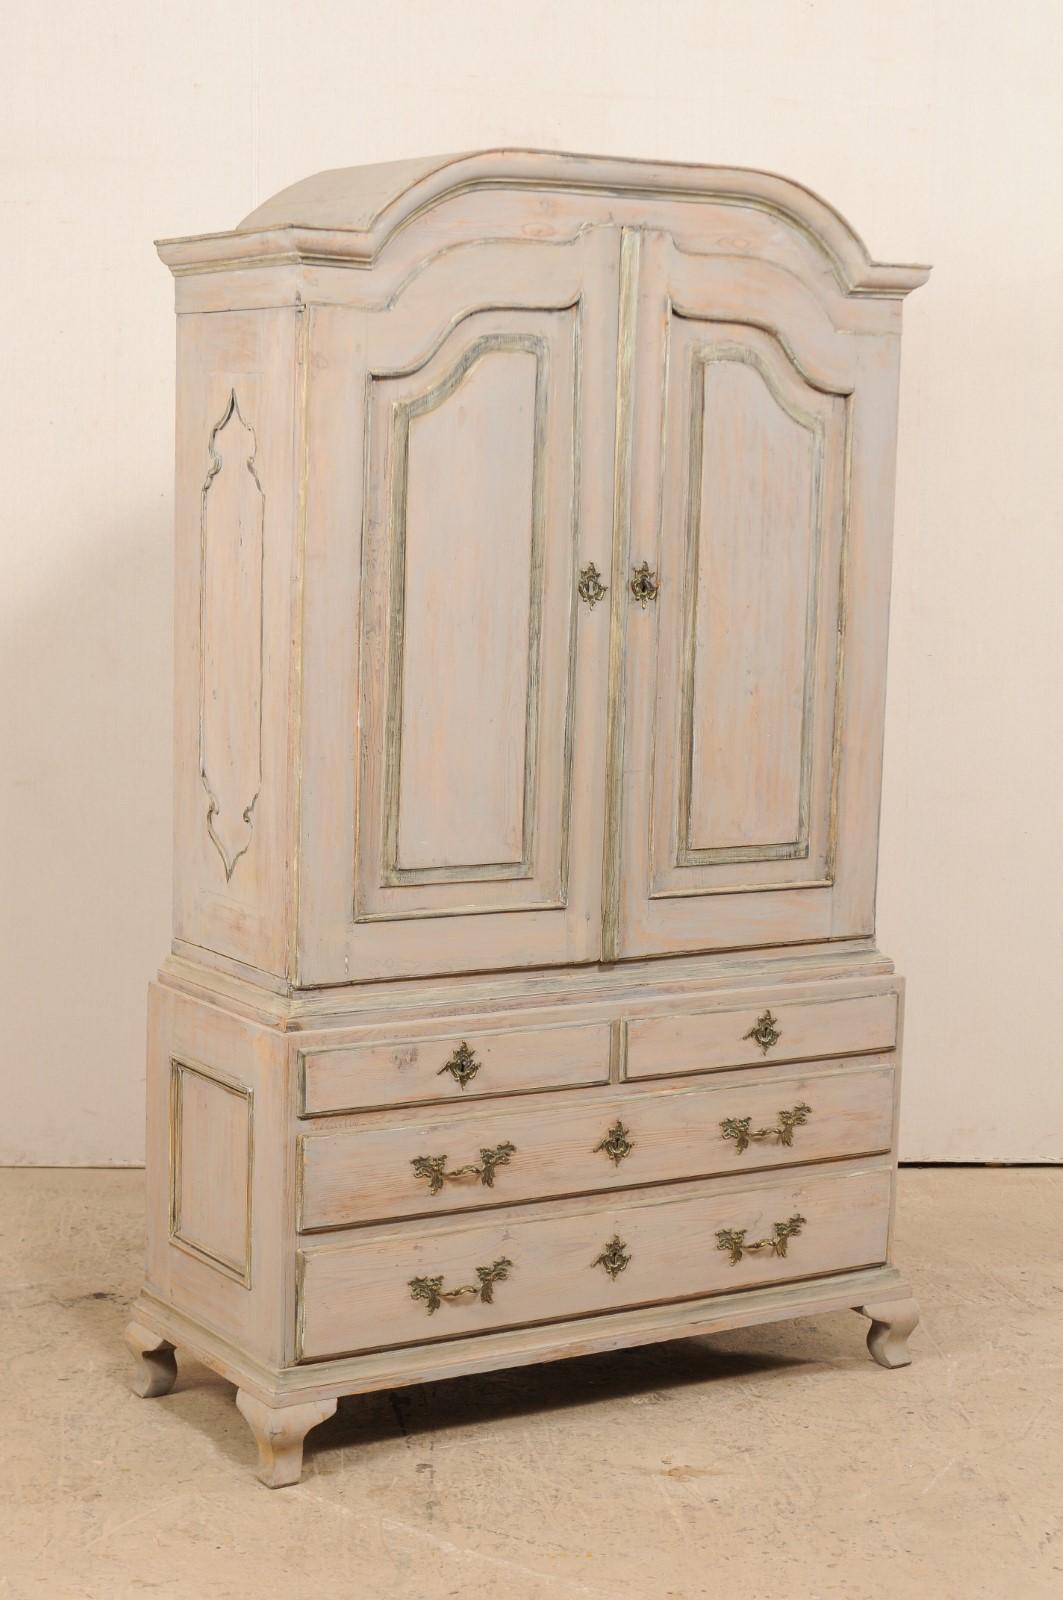 A beautiful Swedish late 18th century period Rococo painted wood cabinet. This spectacular antique cabinet from Sweden features and upper cabinet of two grand doors that open to reveal a spacious interior with three shelves and a full width drawer,